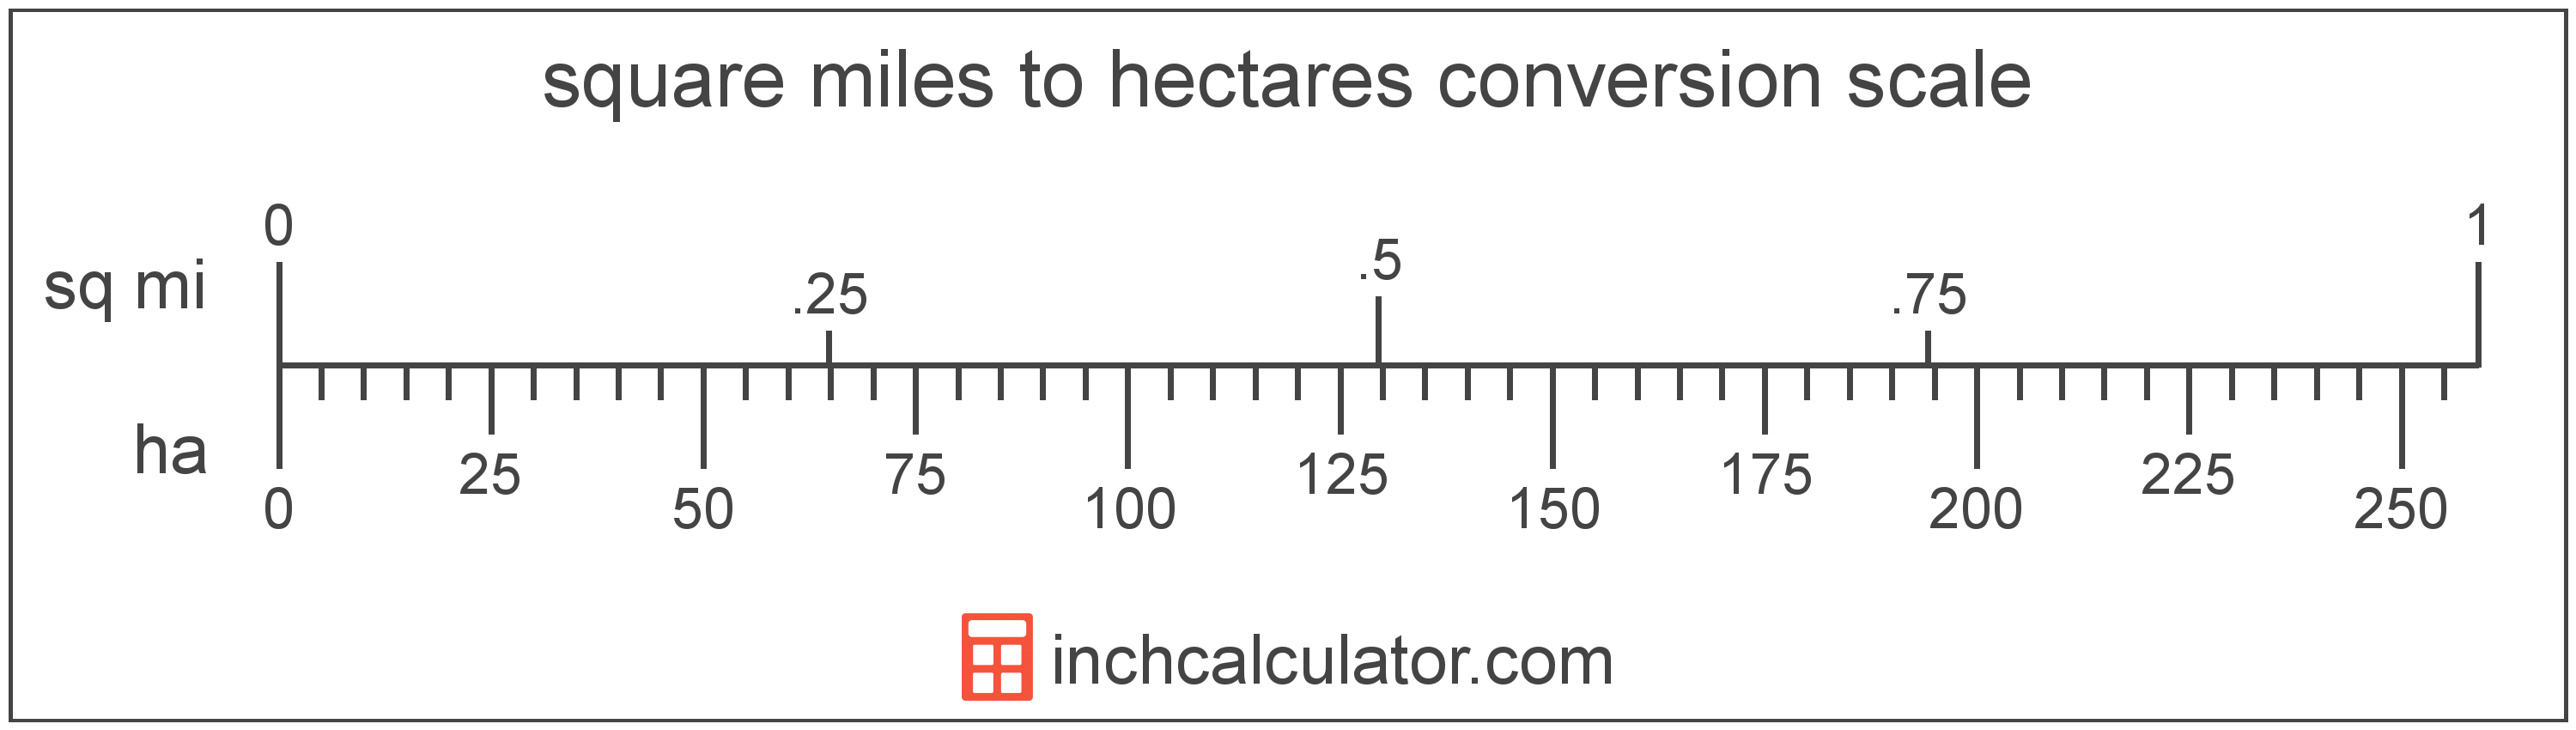 conversion scale showing square miles and equivalent hectares area values